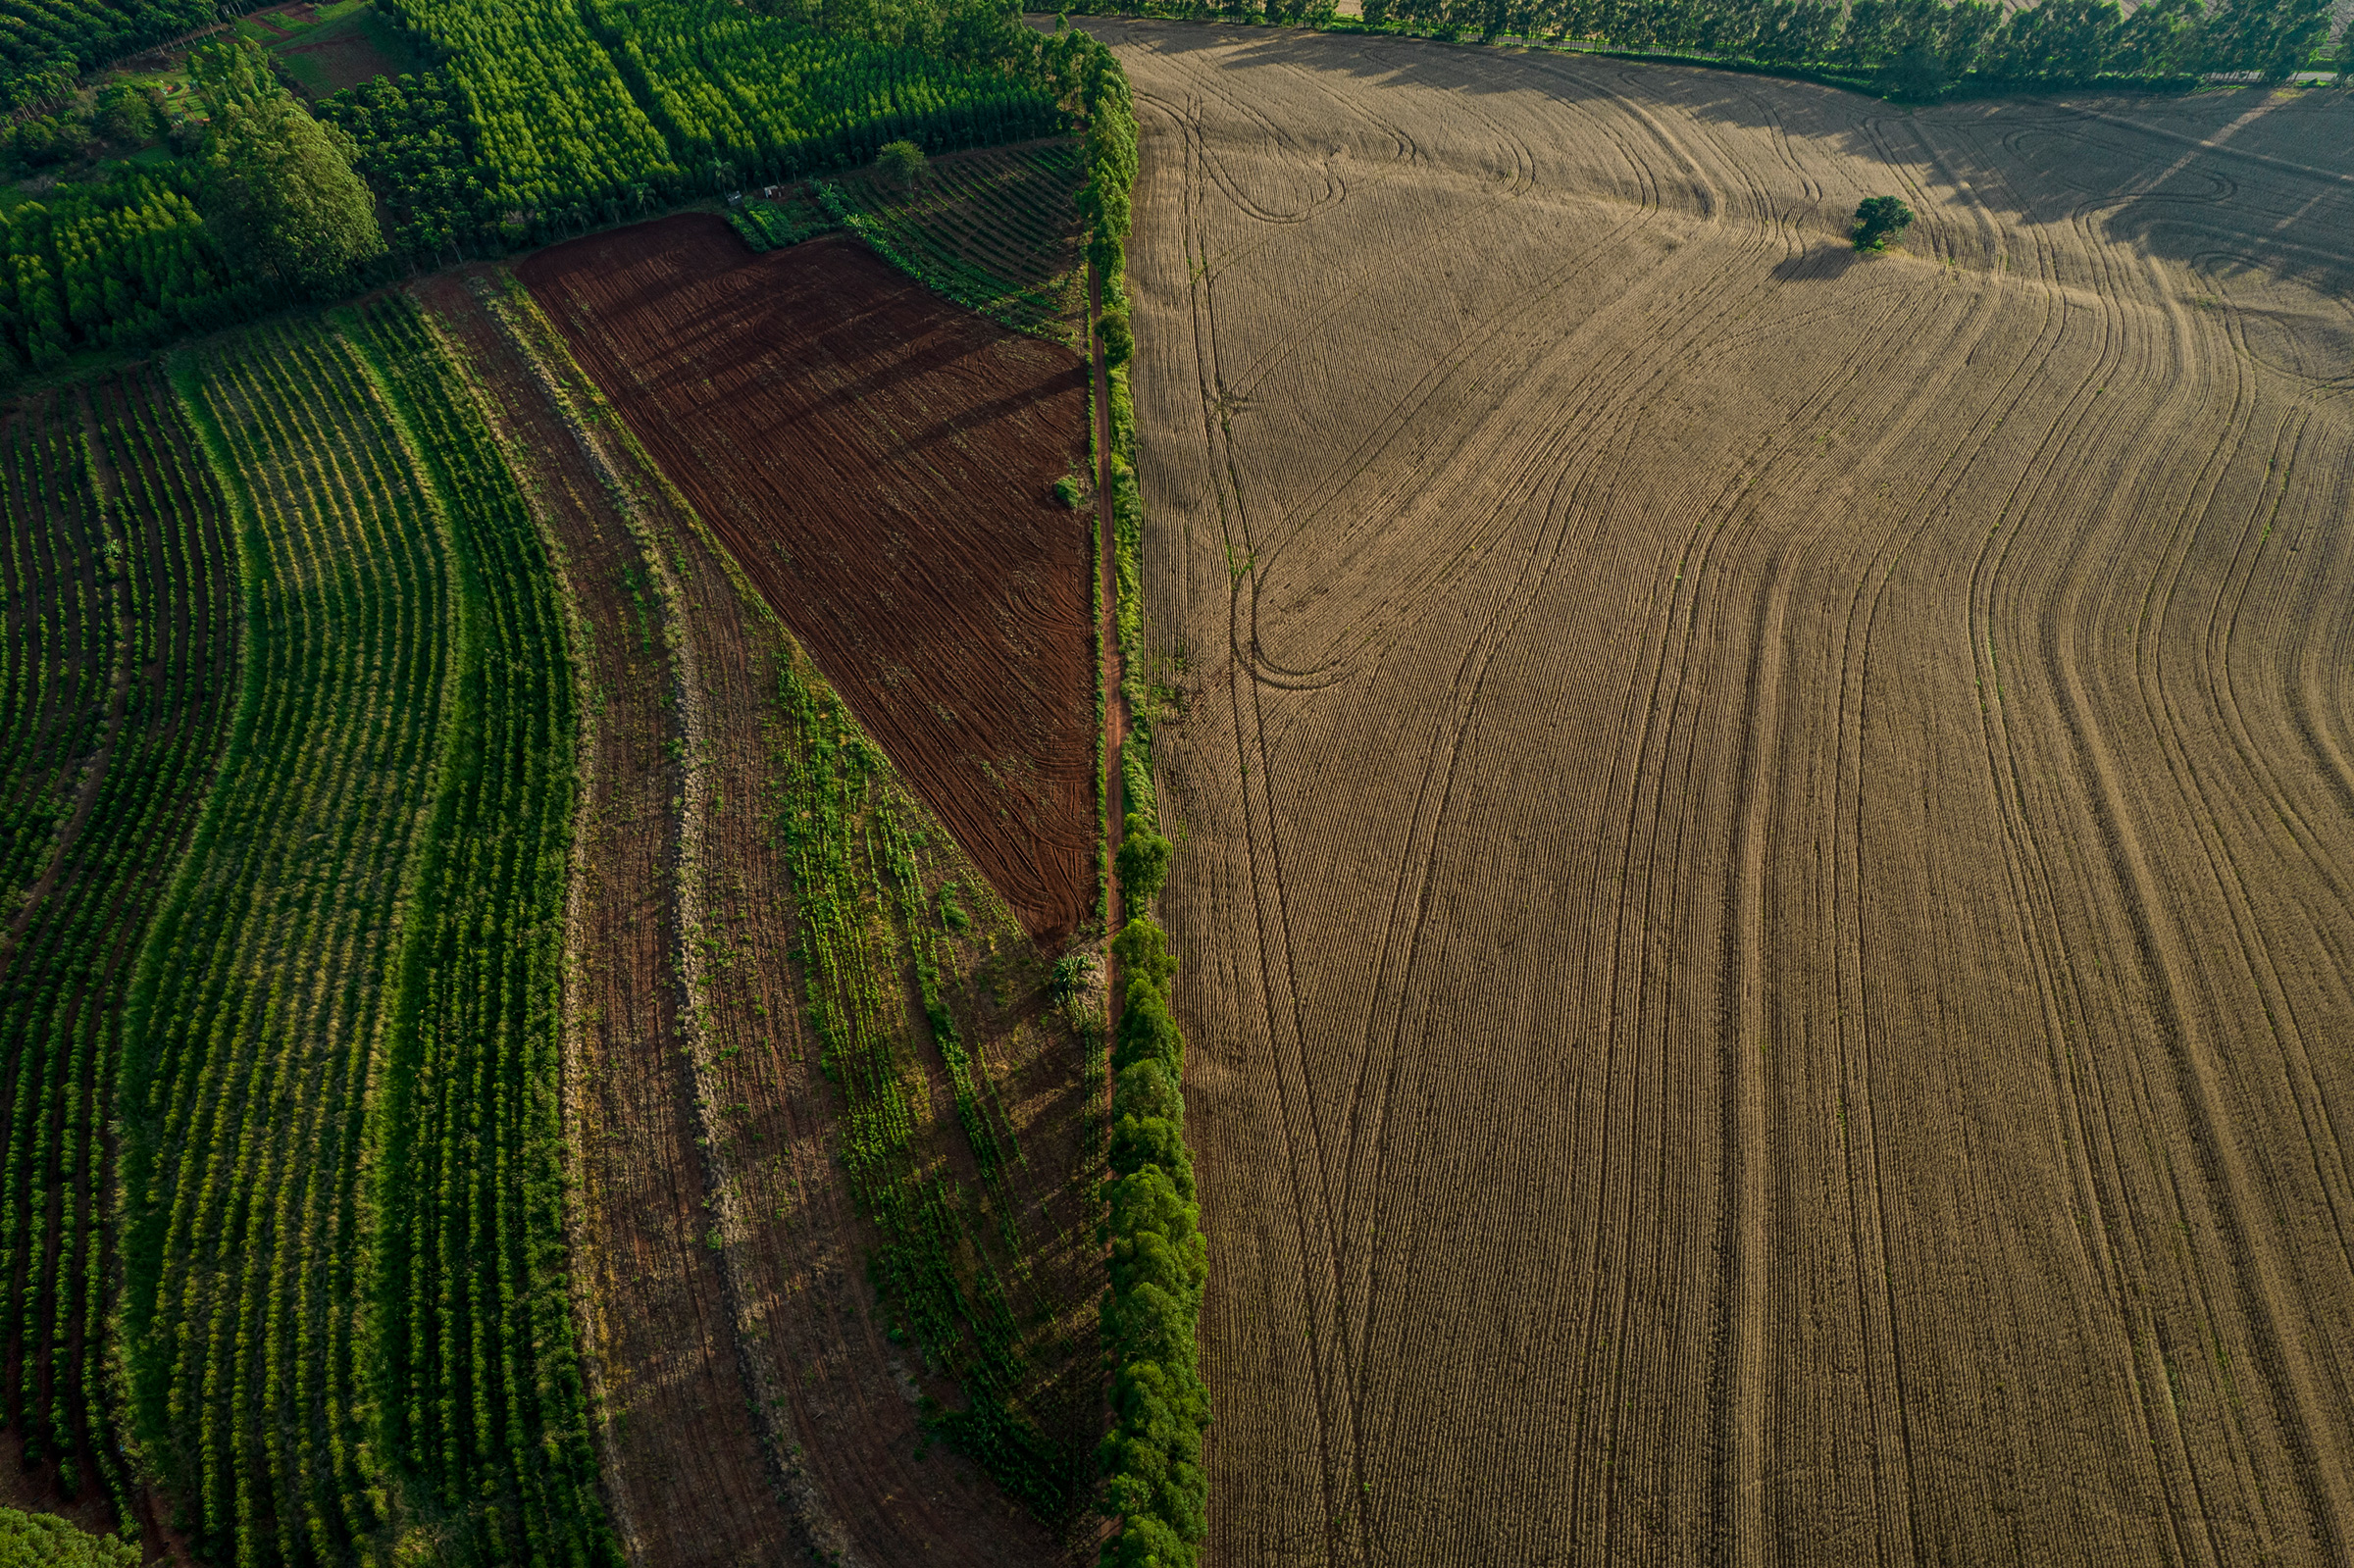 Preta Terra’s agroforestry project, left, beside a monoculture farm, in Timburi, Brazil, on March 29. (Victor Moriyama for TIME)